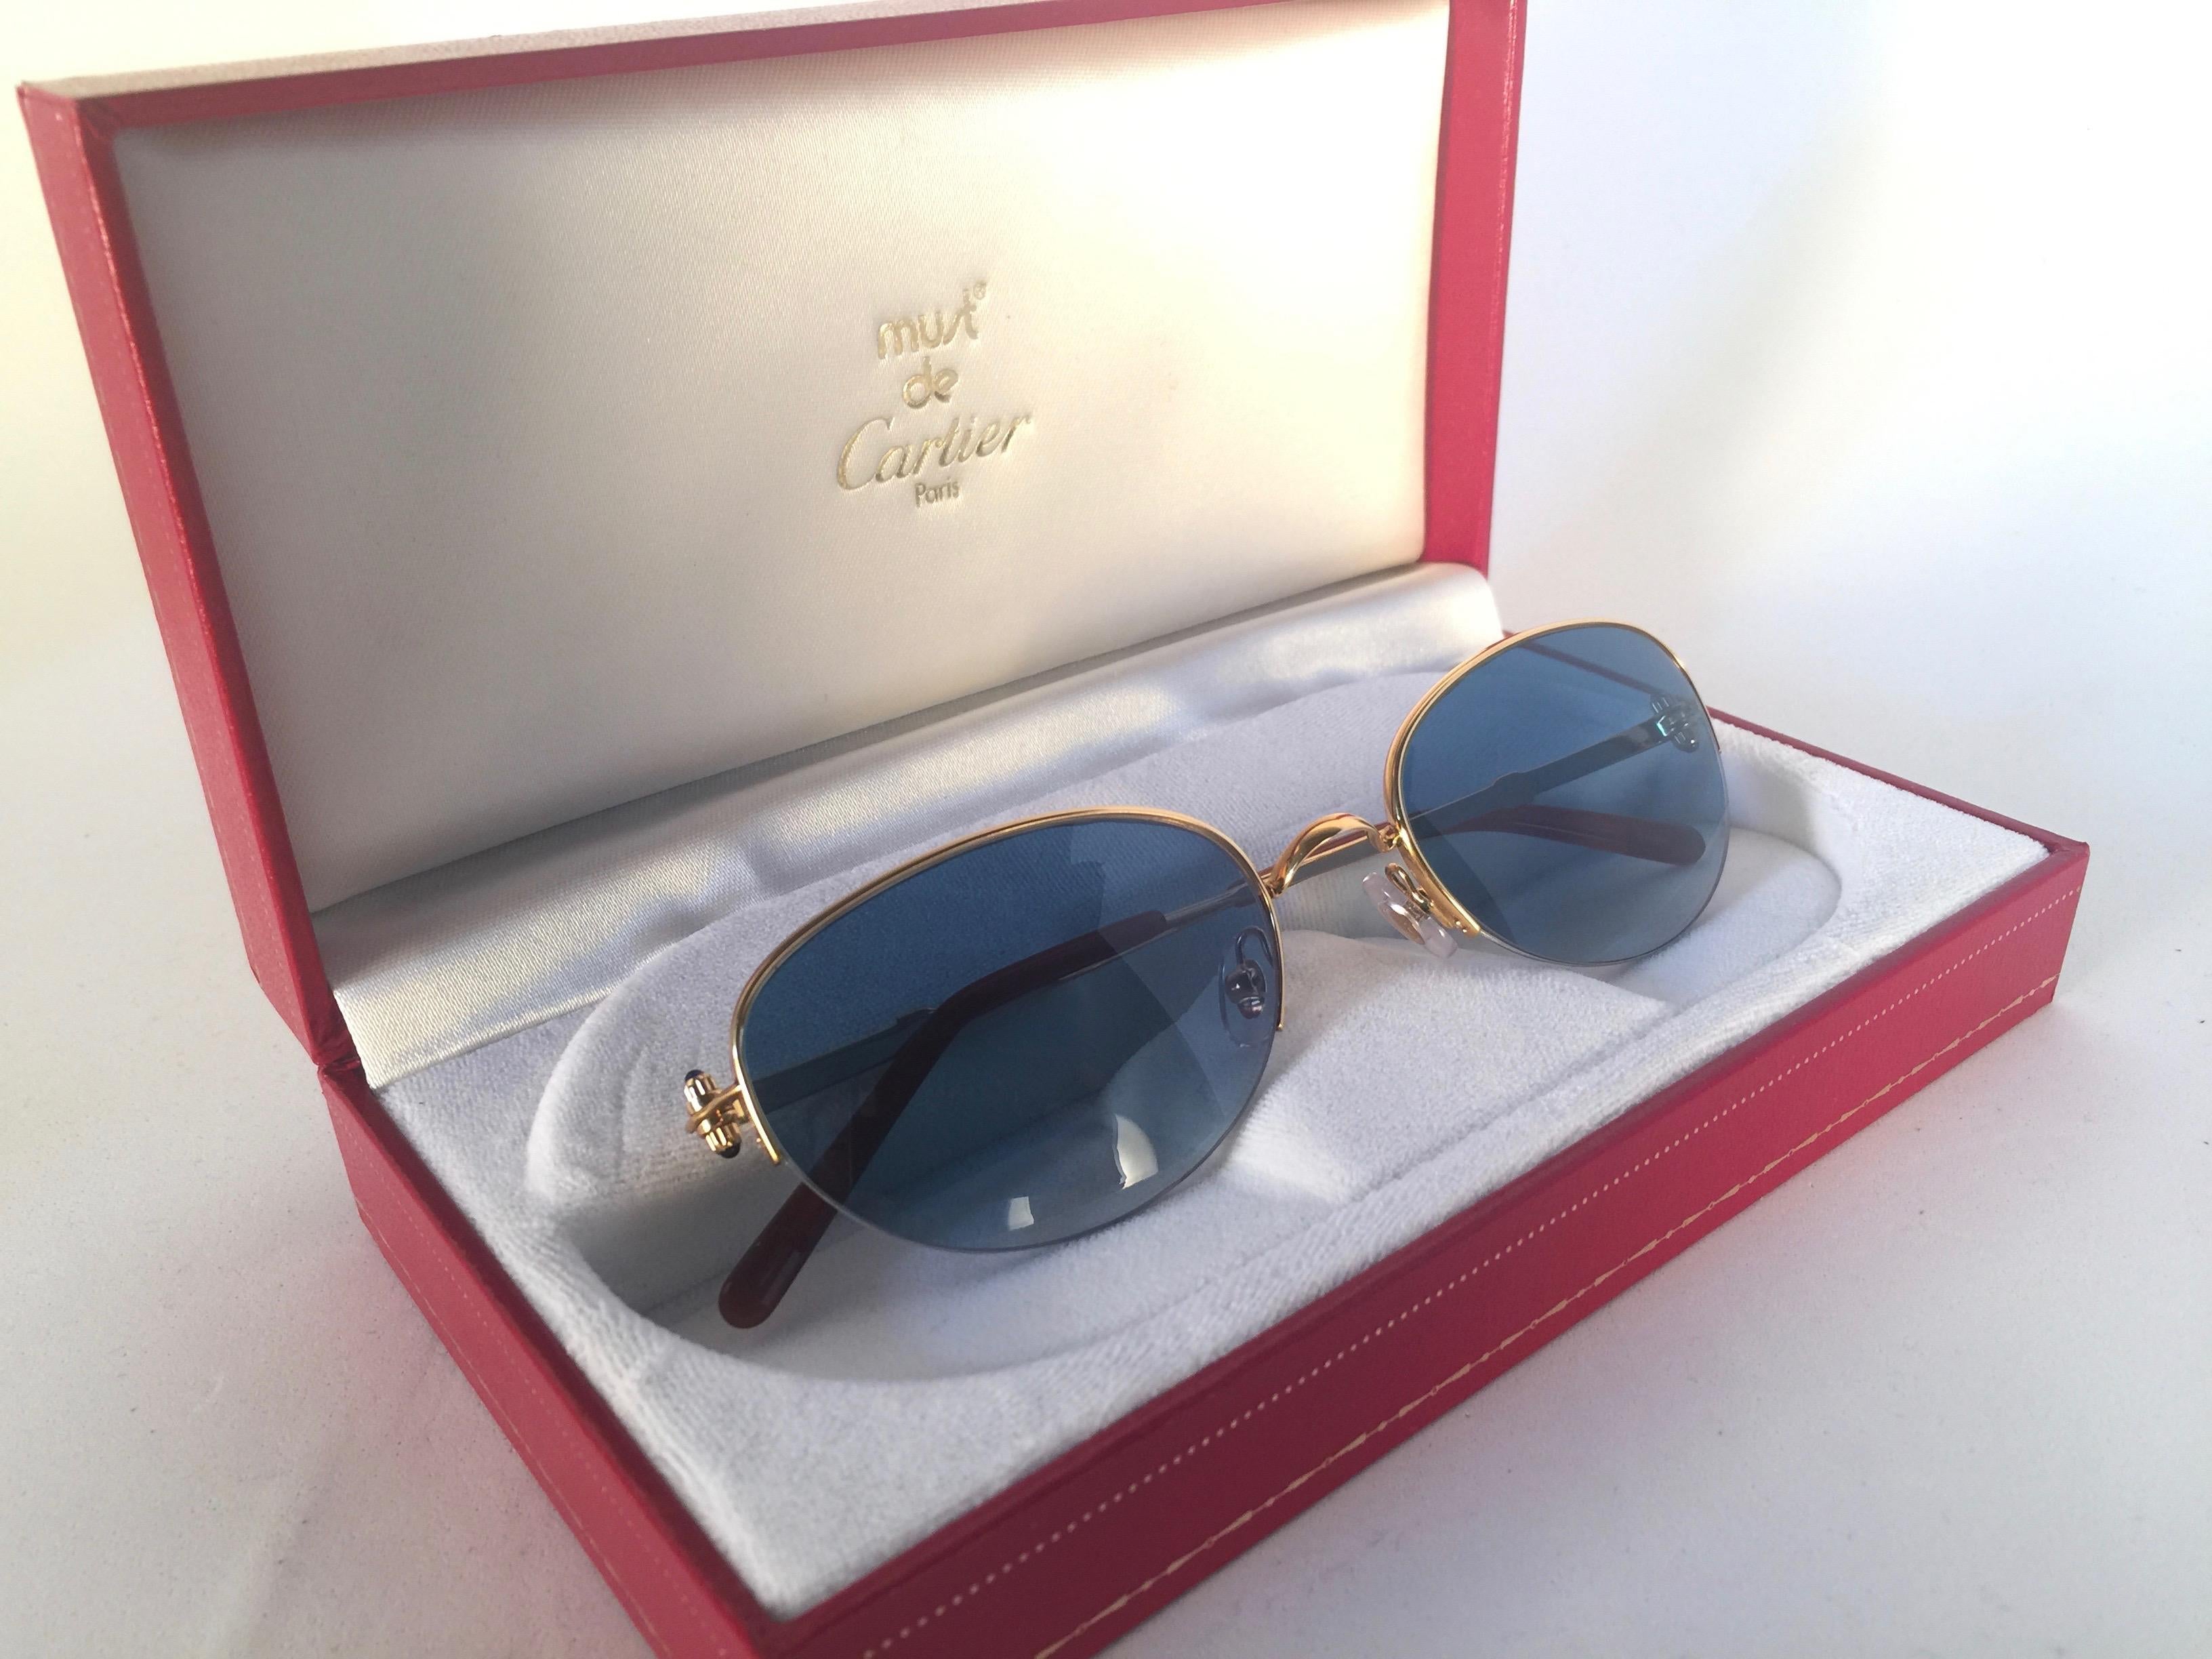 New 1983 Cartier Cabochon sunglasses with blue gradient (uv protection) lenses. Frame is with the front and sides in yellow and white gold. All hallmarks. Cartier gold signs on the earpaddles. These are like a pair of jewels on your nose with the